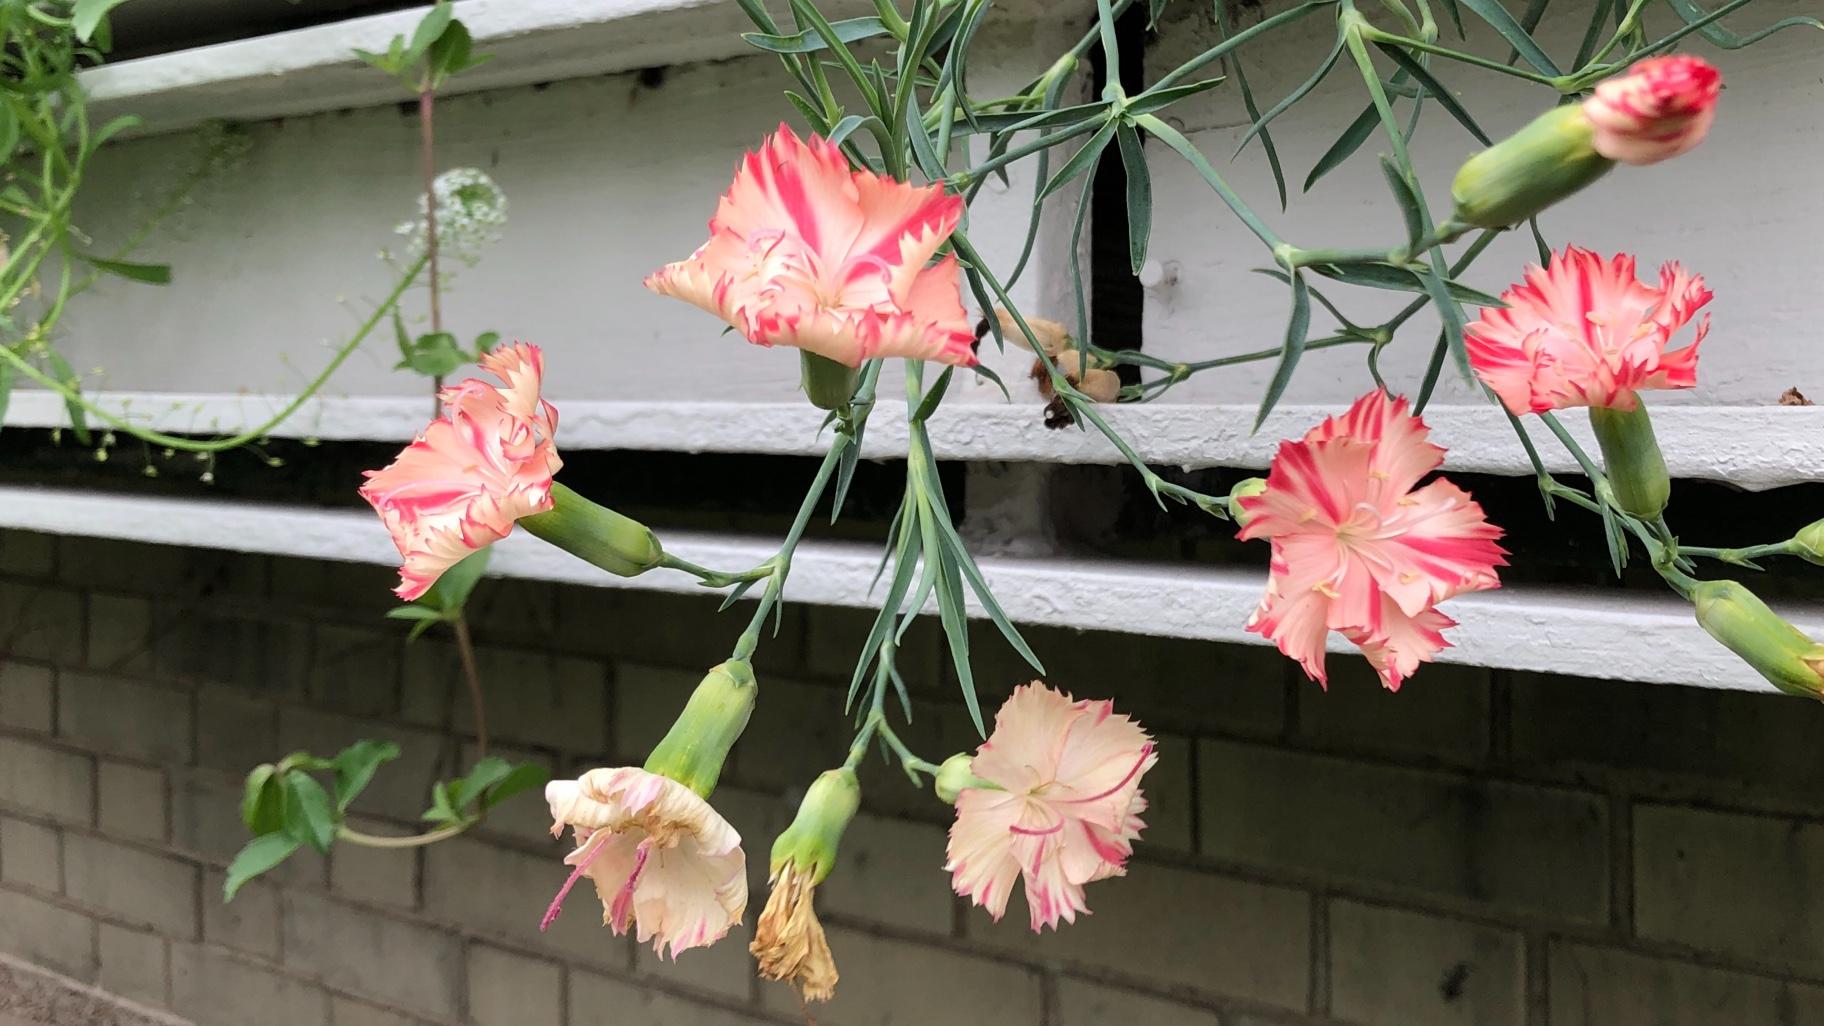 Carnations have fallen out of favor, but Porter loved to paint them. In a happy accident, the conservatory's plantings formed an intended swag by reaching for the sun. (Patty Wetli / WTTW News) 